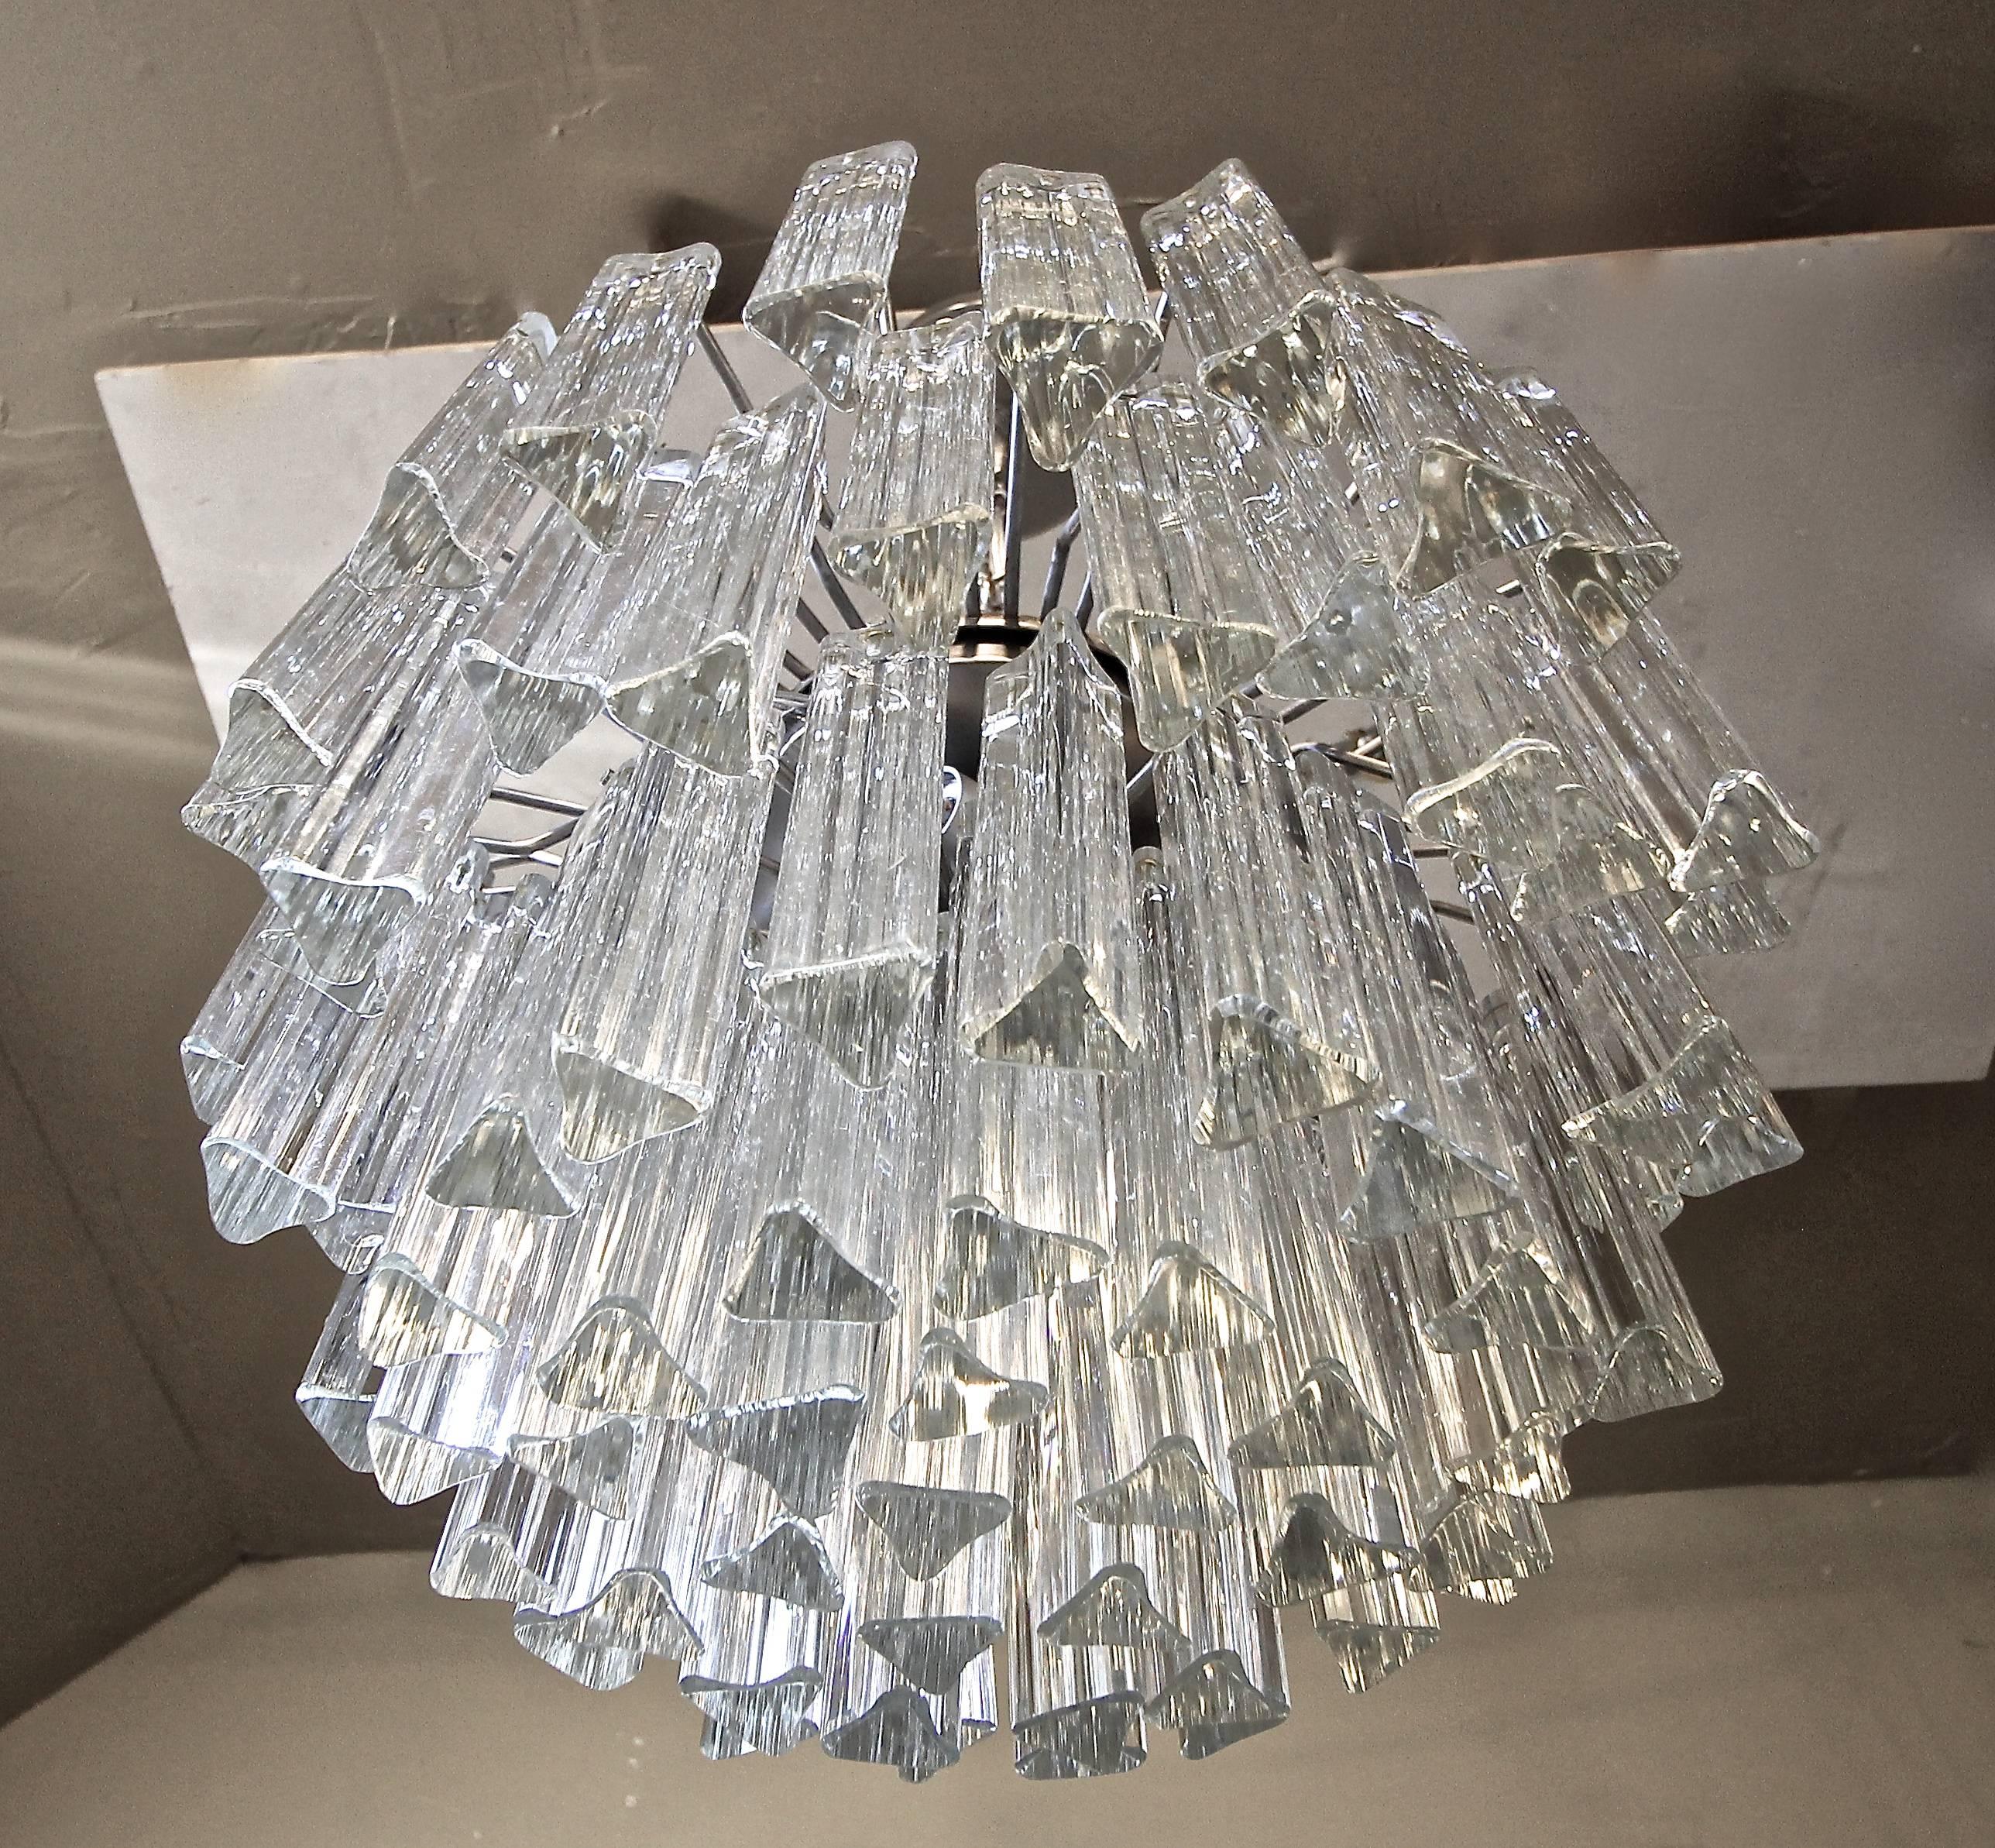 Venini multi-tier triedri crystal prism four-light chandelier with steel frame. Fixture uses four 40 watt max candelabra base bulbs. Newly wired. Overall height with chain and canopy is 30" can be adjusted as needed.